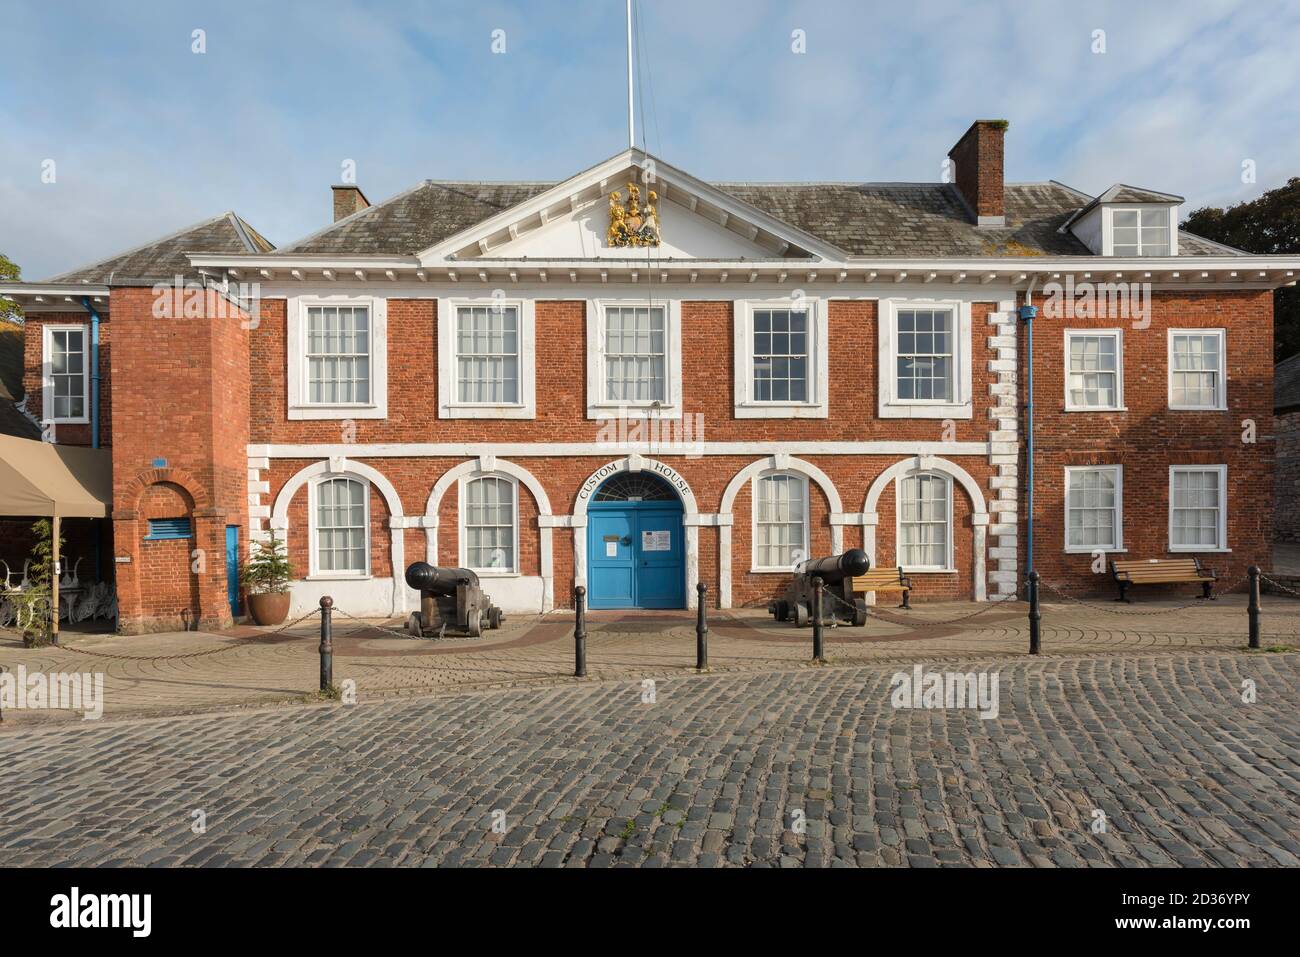 Exeter Custom House, view of the historic Custom House (1681) sited in The Quay waterfront area in Exeter, Devon, south west England, UK Stock Photo